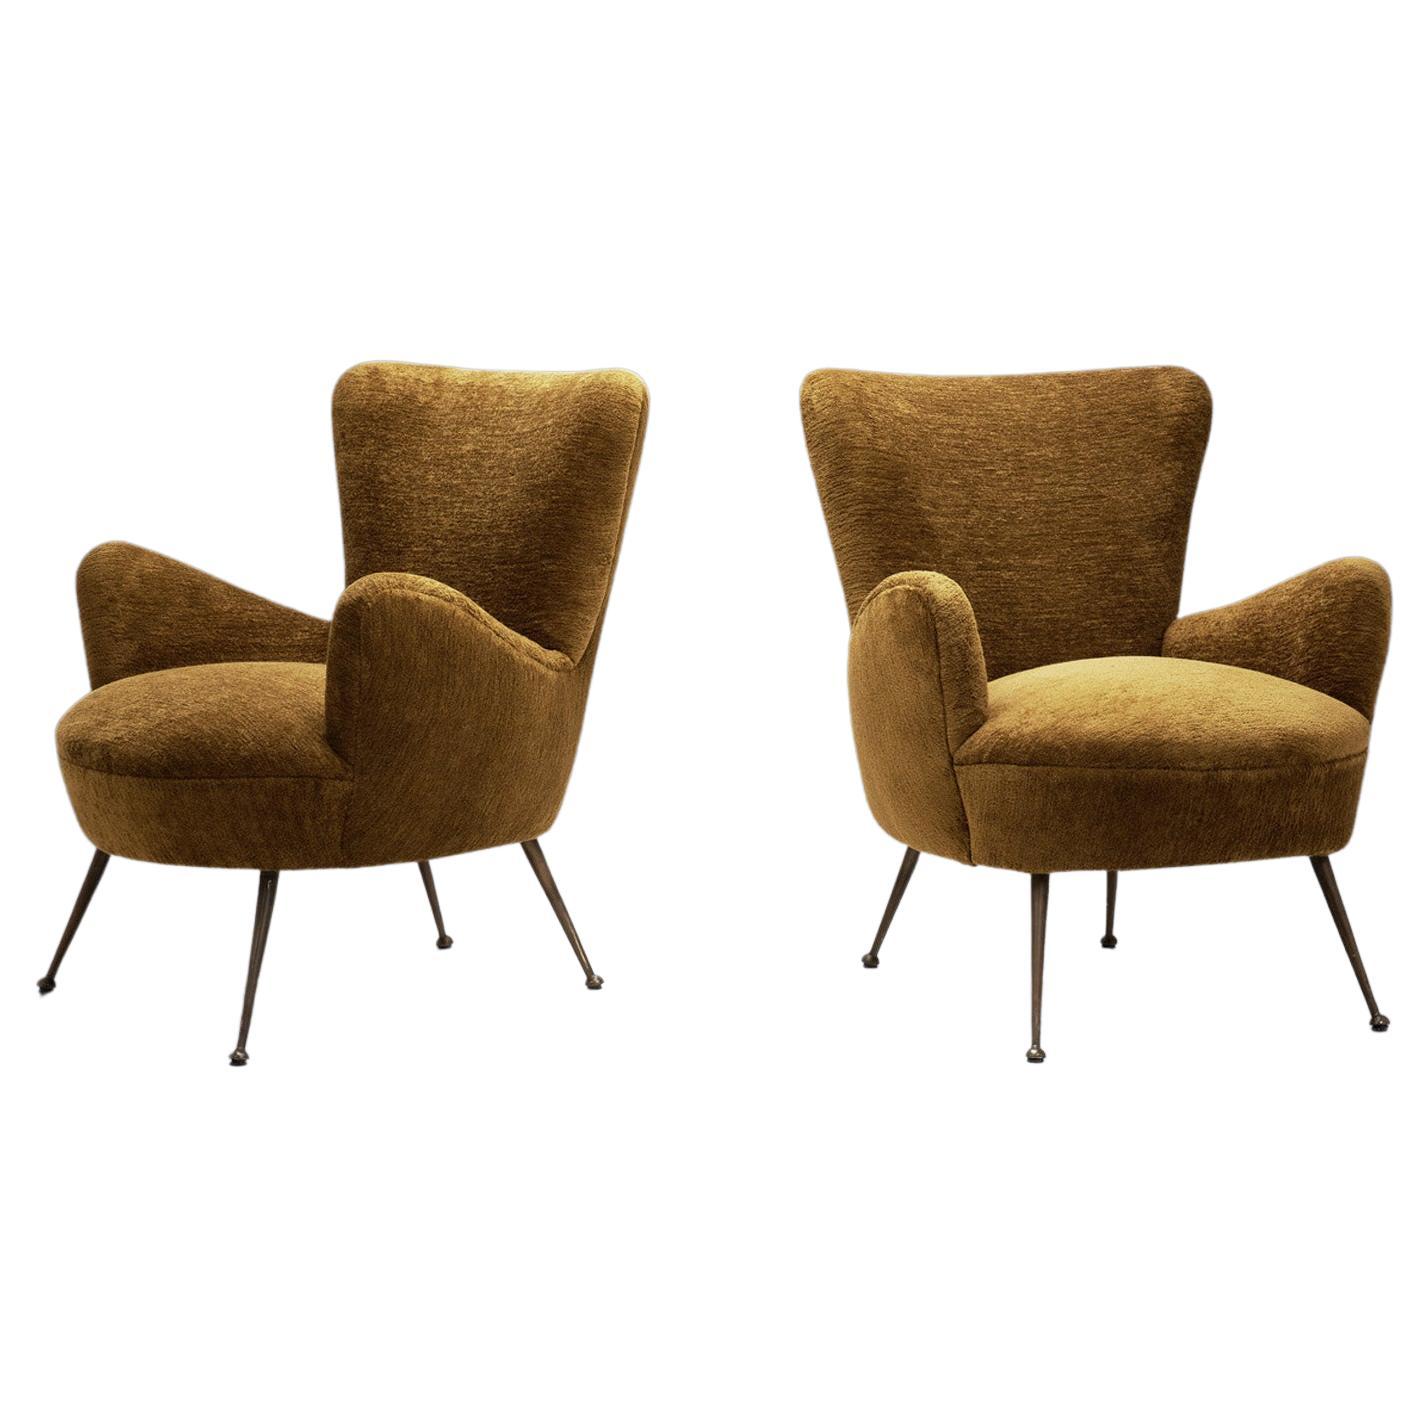 Italian Modern Armchairs with Brass Legs, Italy, 1960s For Sale